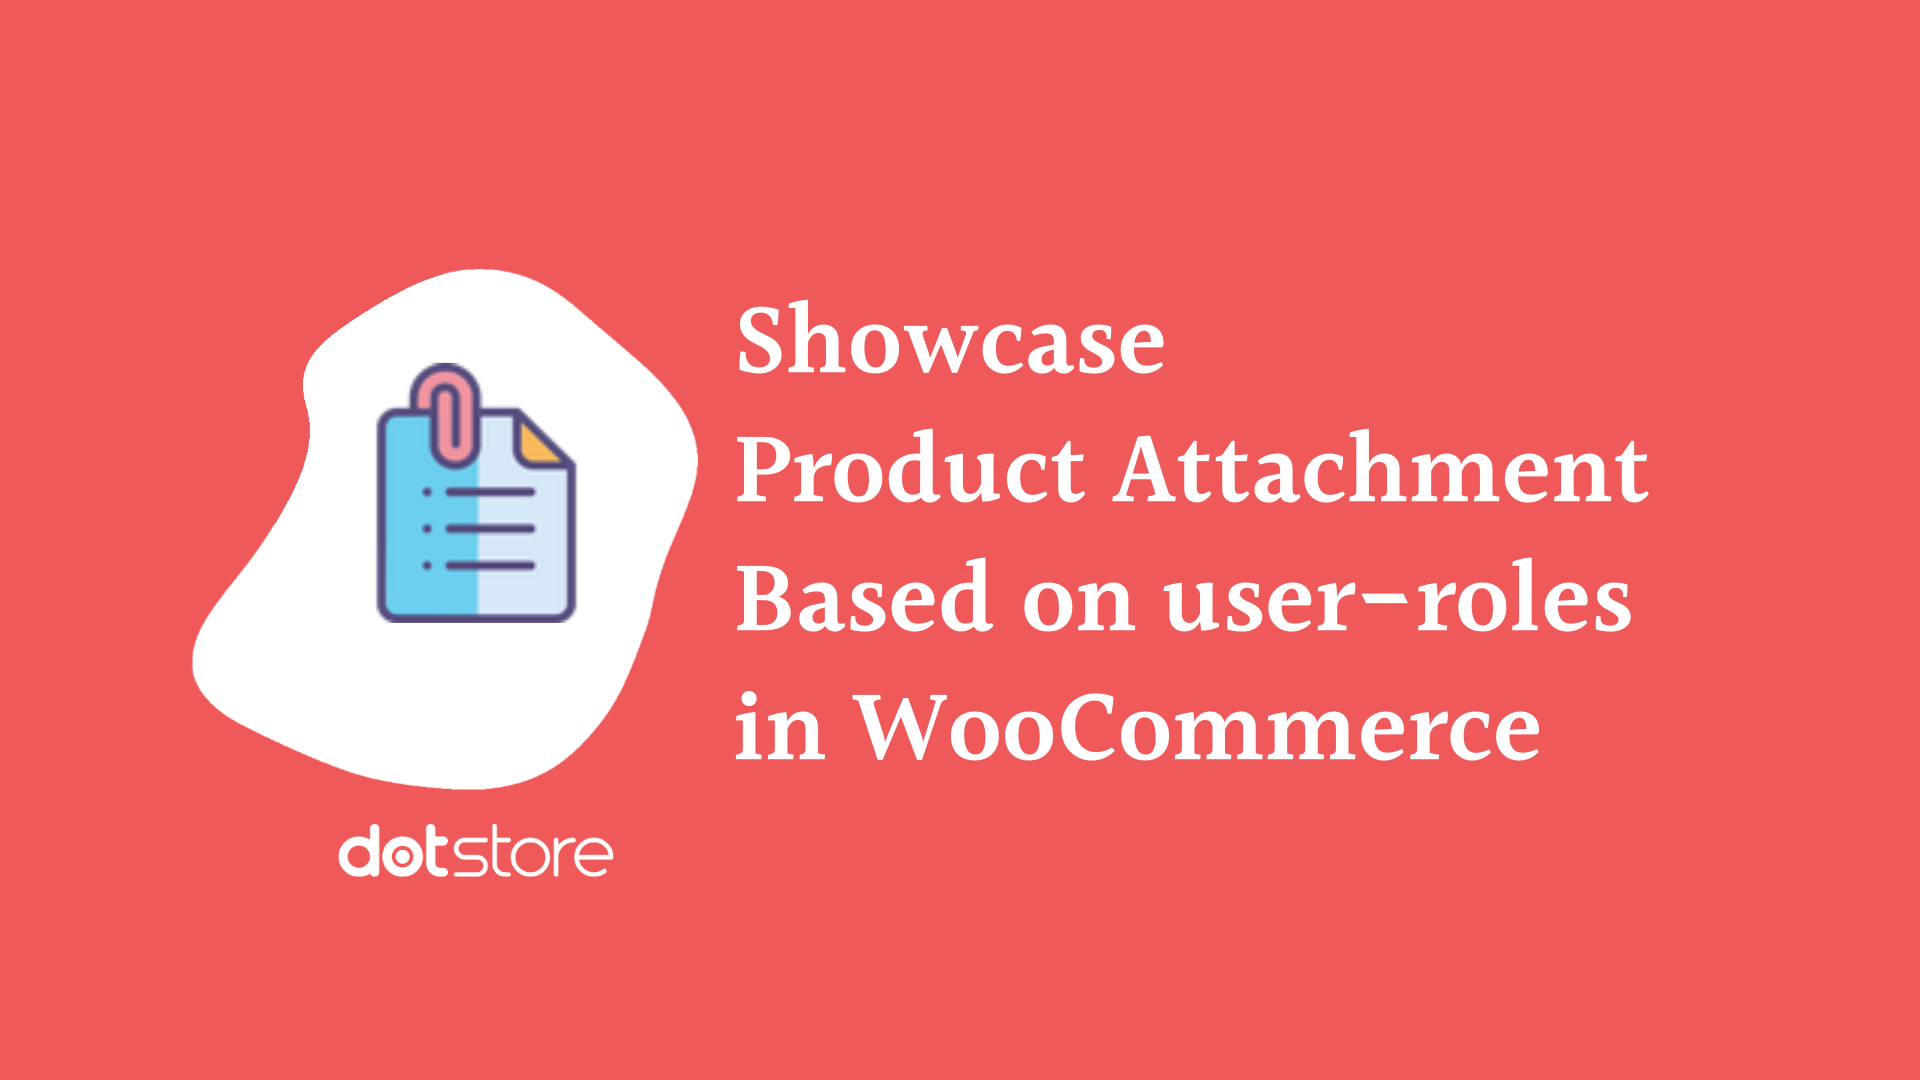 How to display product attachment for different types of users in your WooCommerce Store